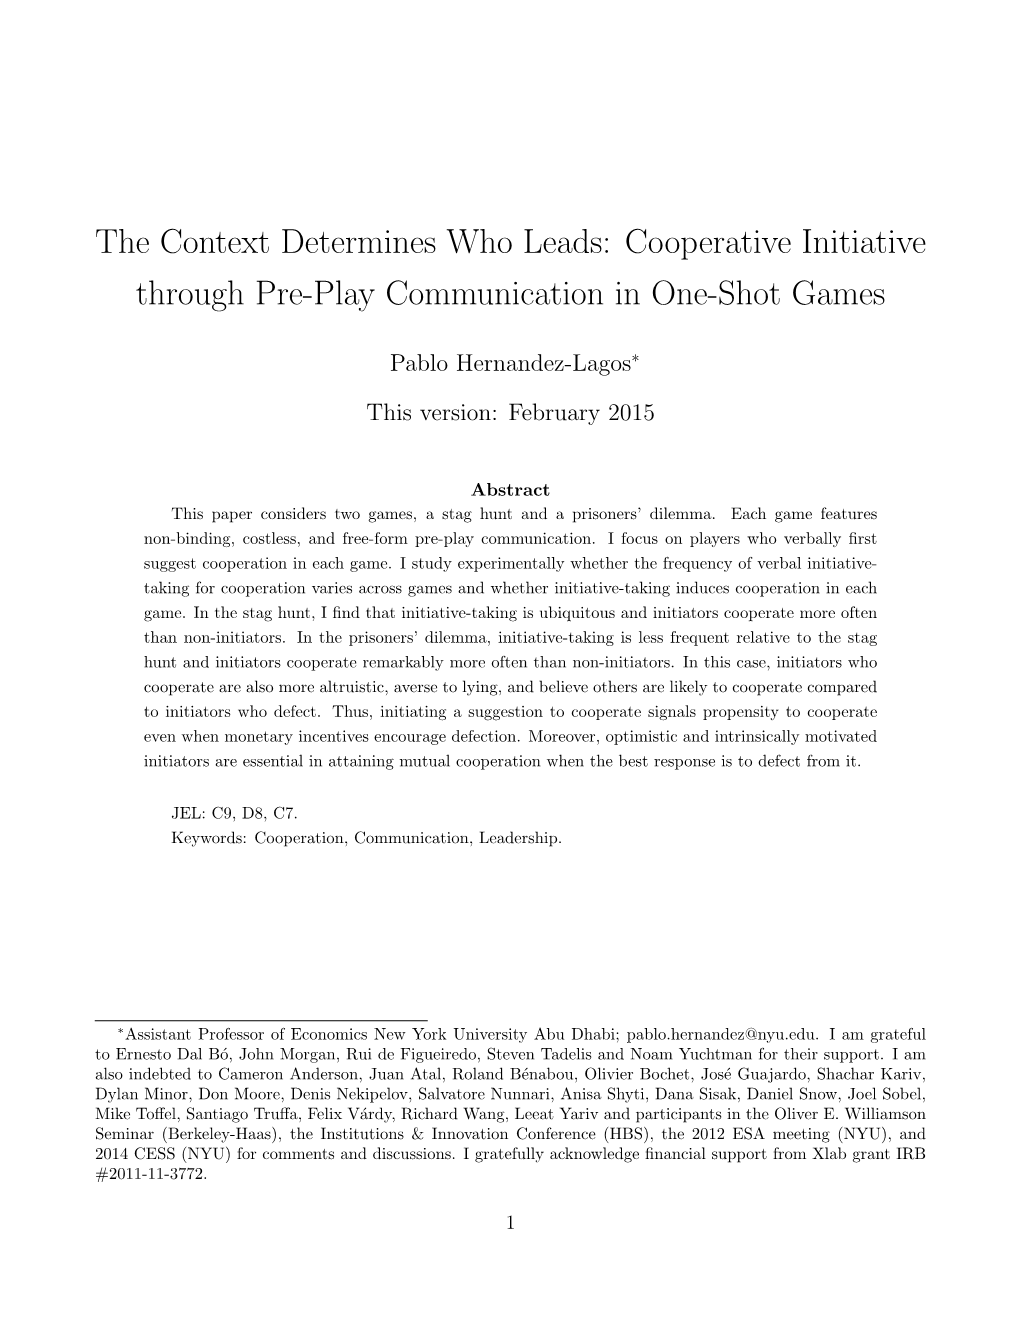 The Context Determines Who Leads: Cooperative Initiative Through Pre-Play Communication in One-Shot Games